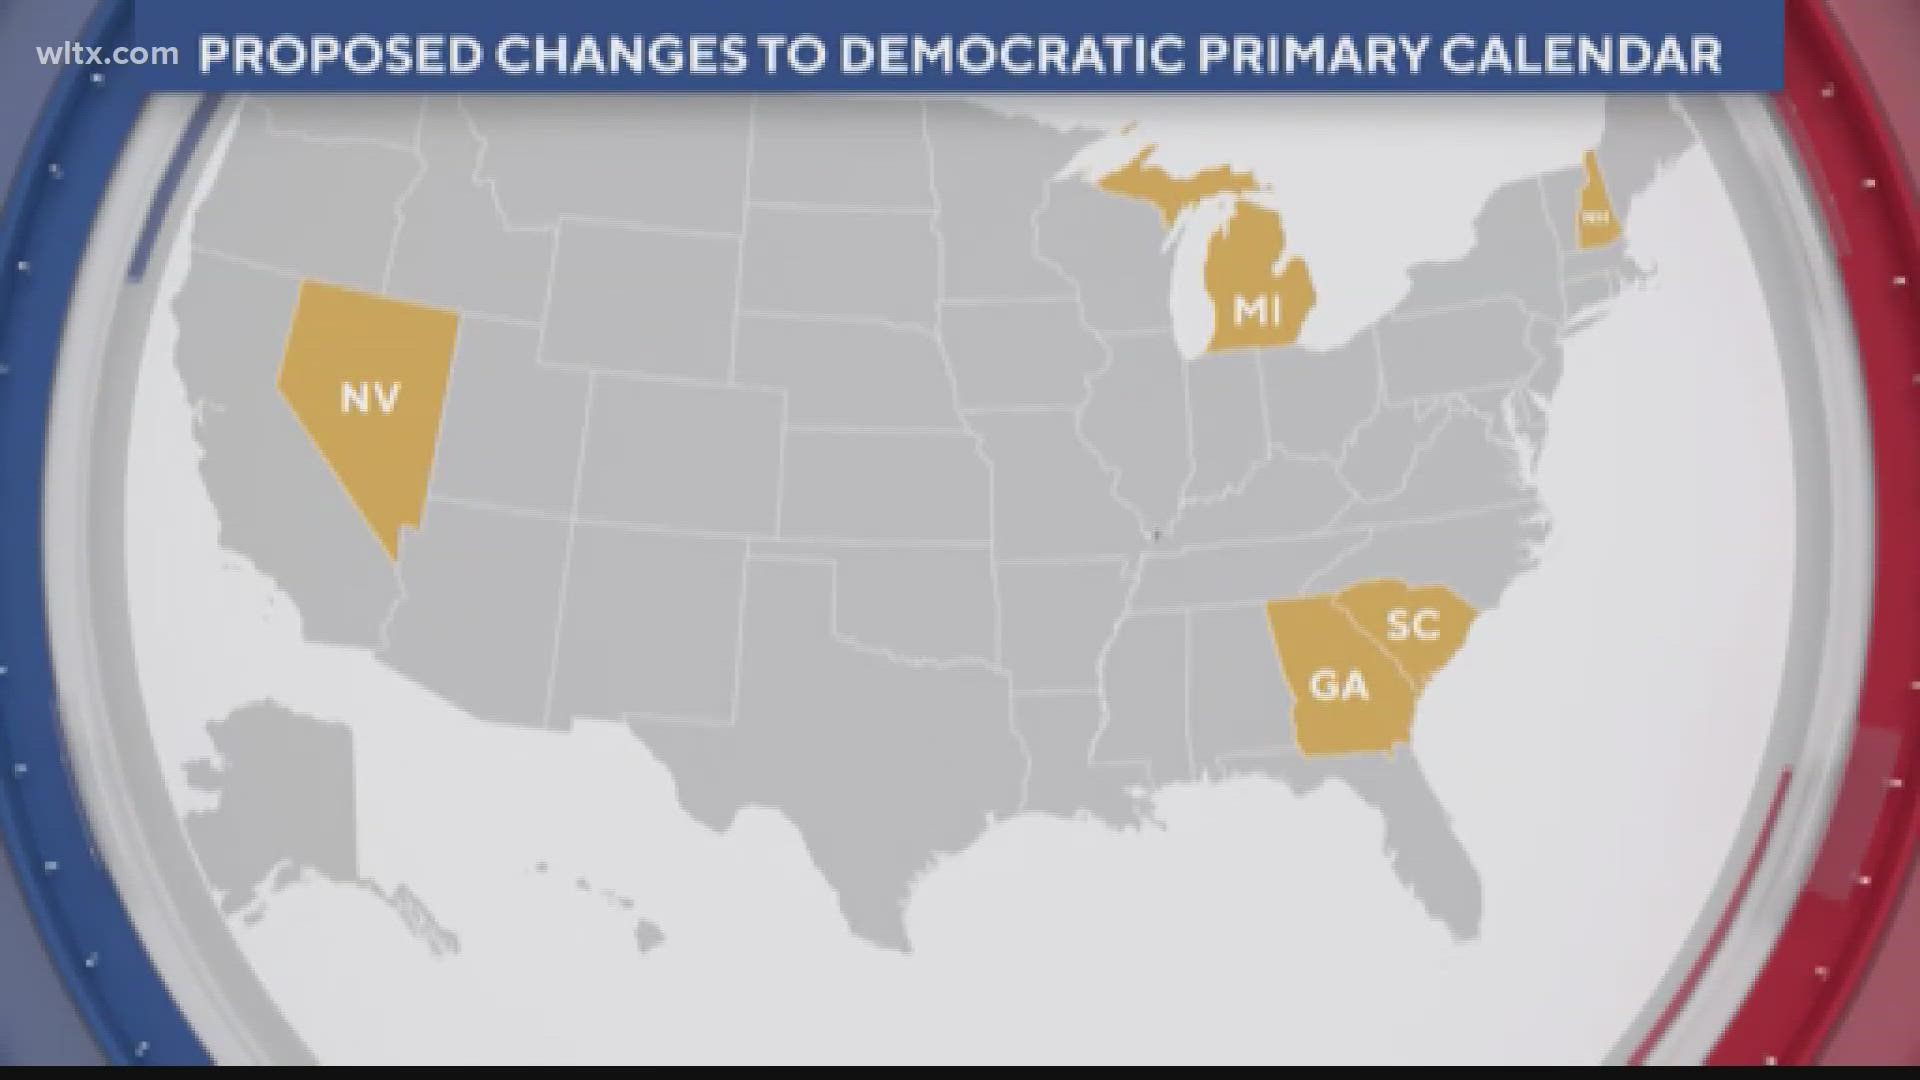 The Democratic National Committee has voted to make SC their first presidential primary in 2024.